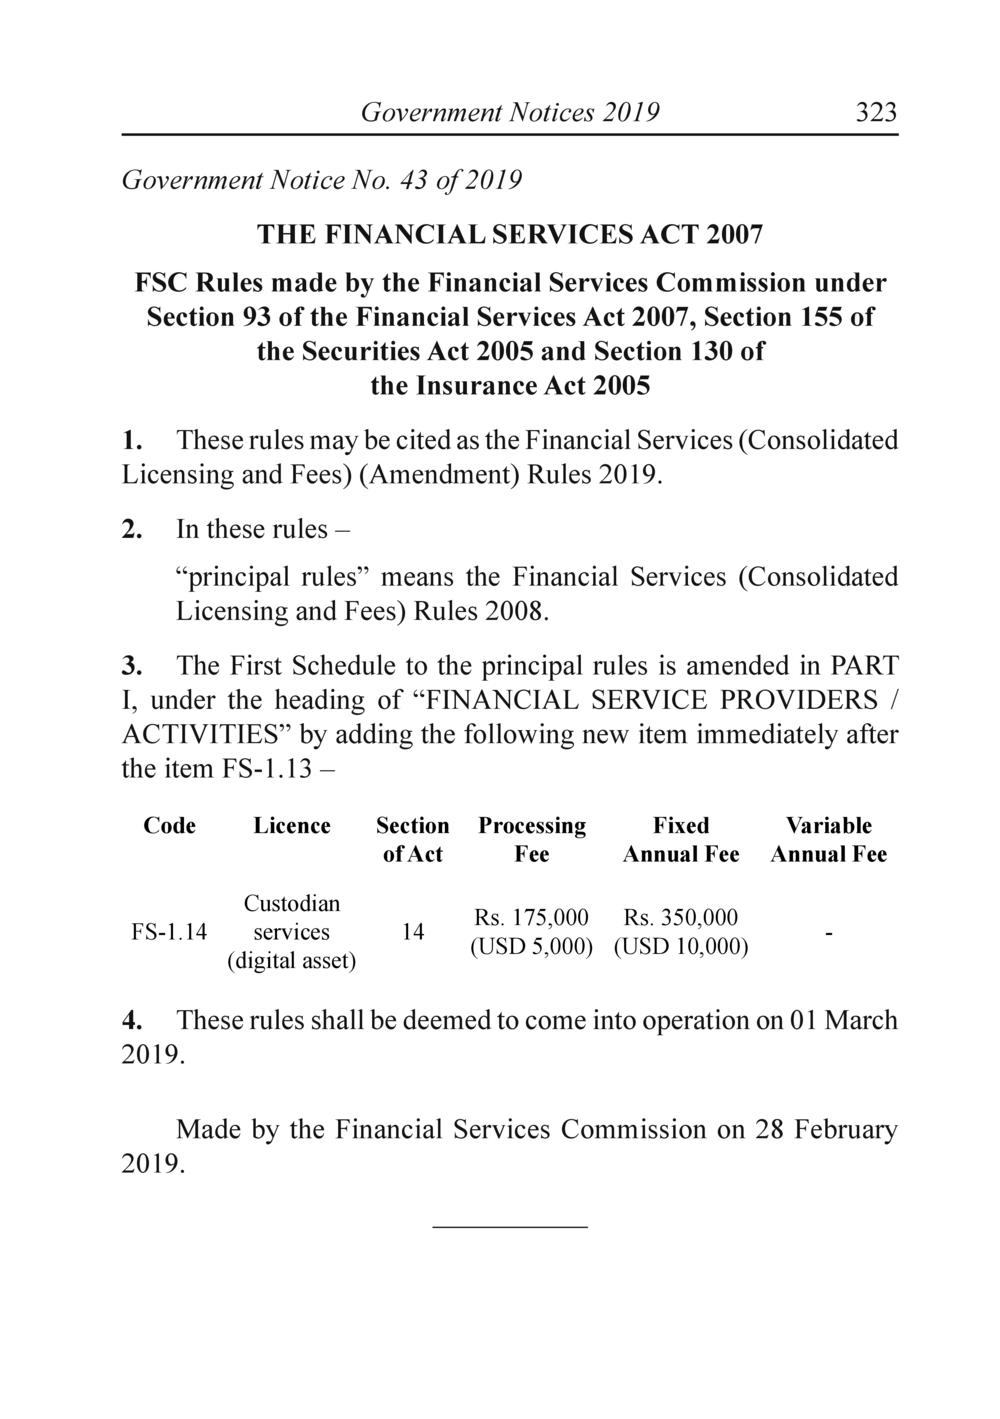 FSC Rules made by the Financial Services Commission under Section 93 of the Financial Services Act 2007